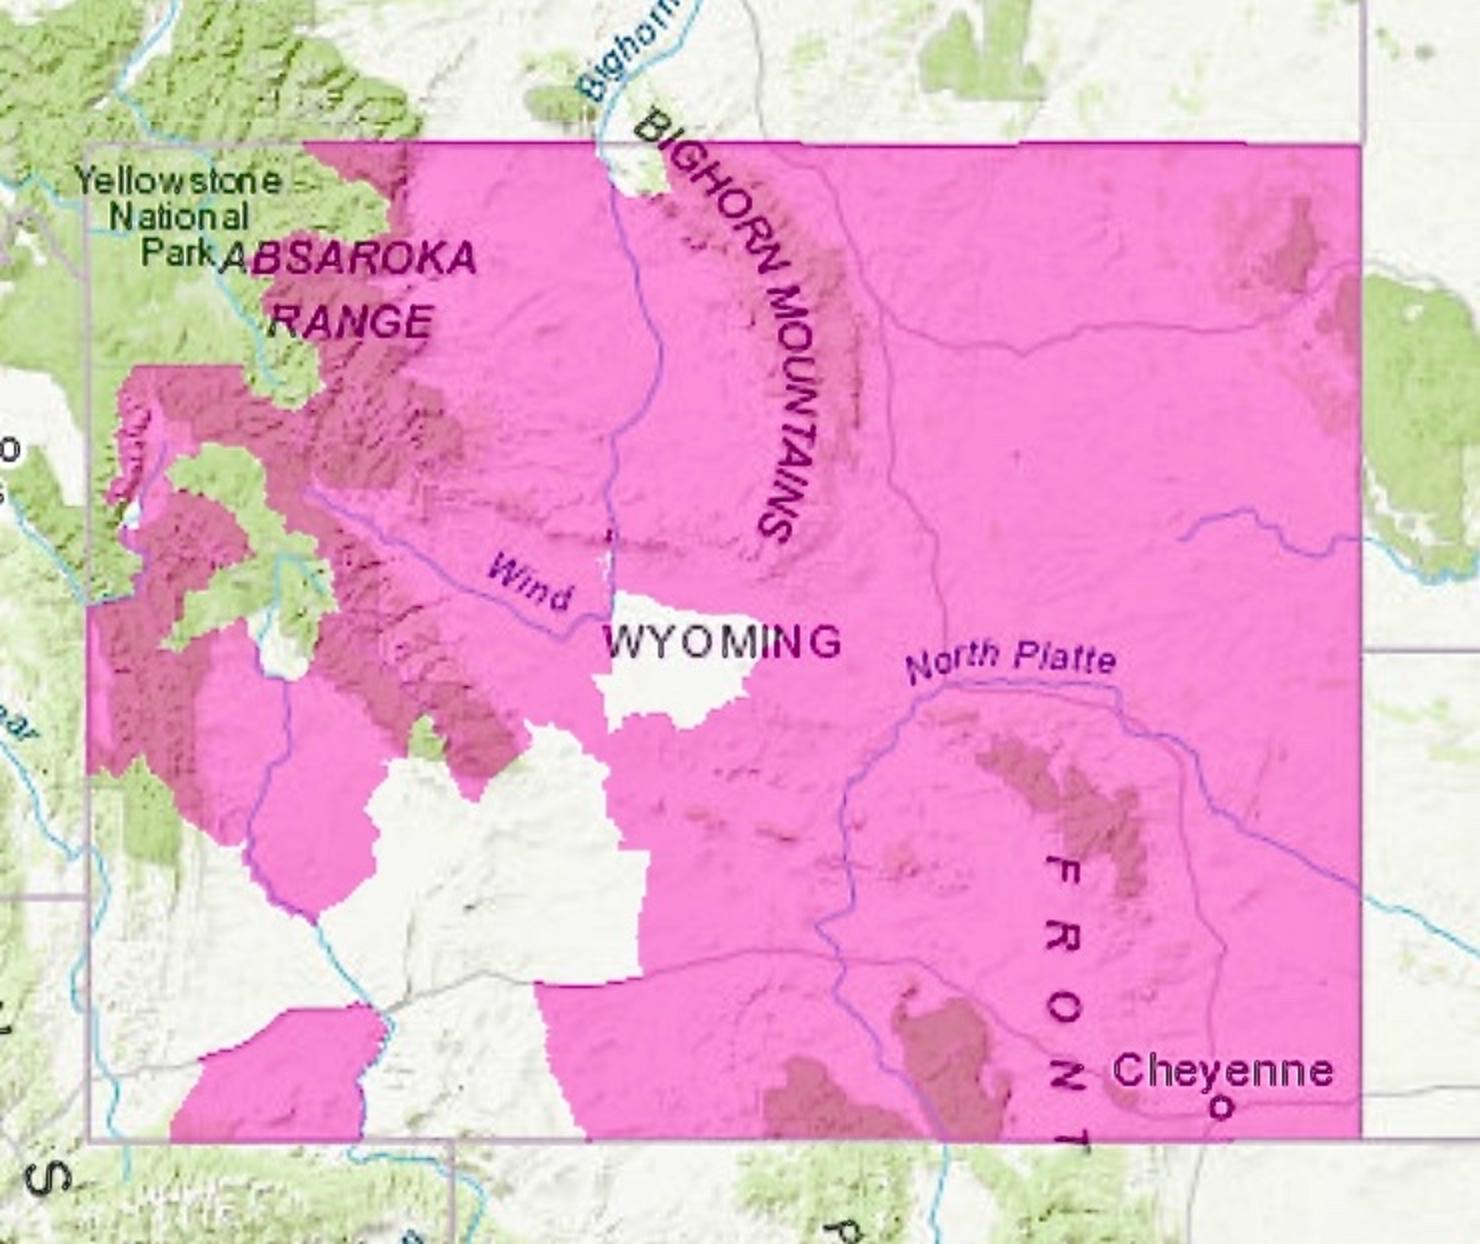 The reddish portions of this map of Wyoming show how CWD has spread and areas of the state where the disease is known to be endemic.  So far, CWD has not been confirmed in Yellowstone and CWD-positive animals have been found on the outsider perimeter of the National Elk Refuge in Jackson Hole. Map courtesy Wyoming Game and Fish